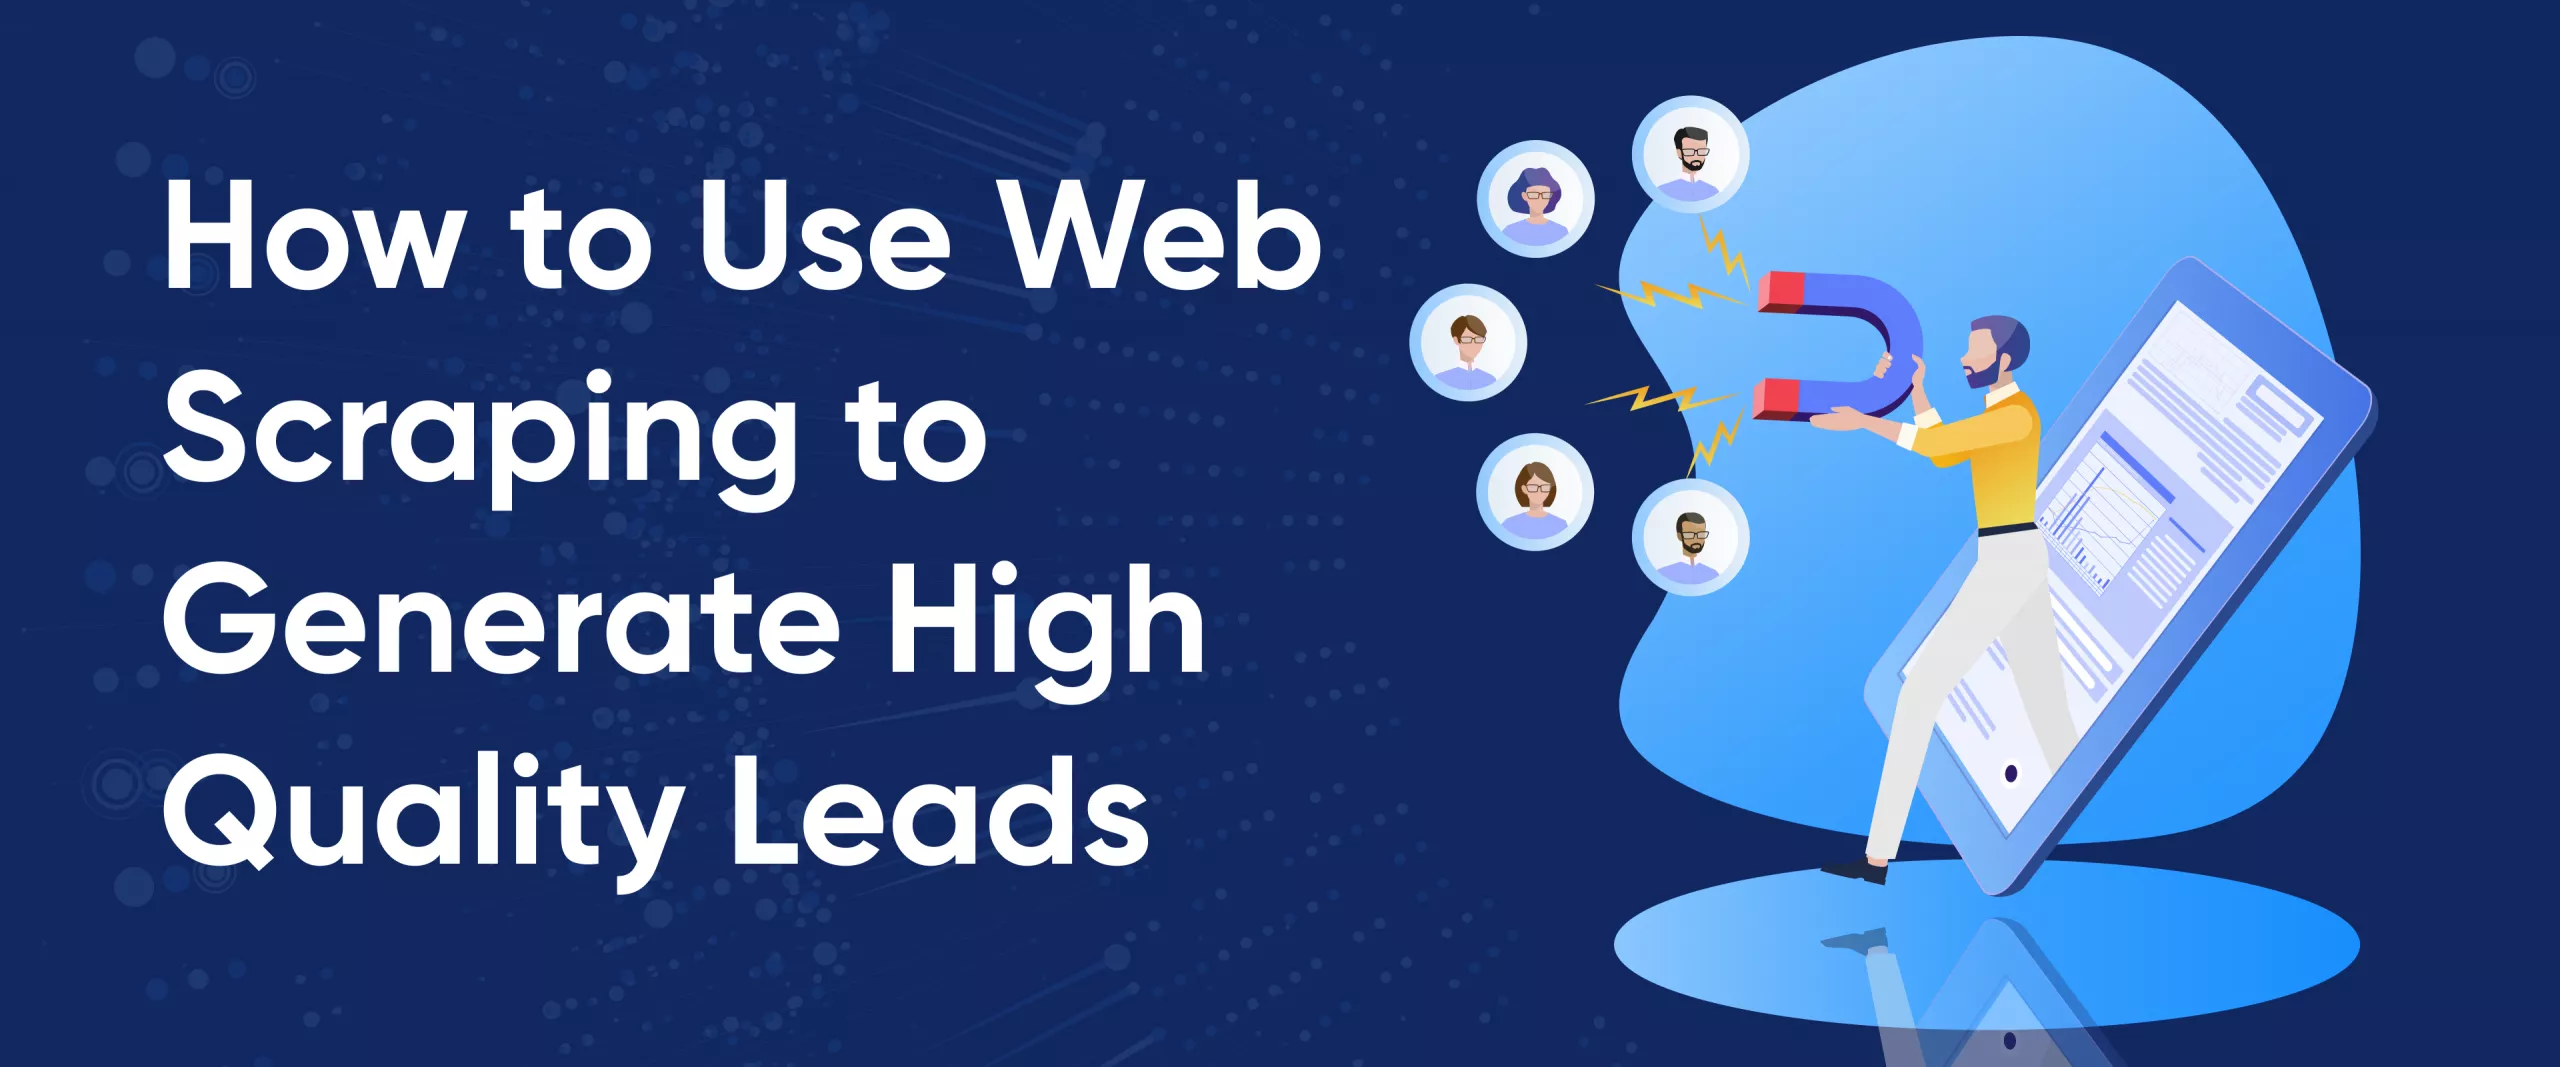 How to Use Web Scraping to Generate Business Leads